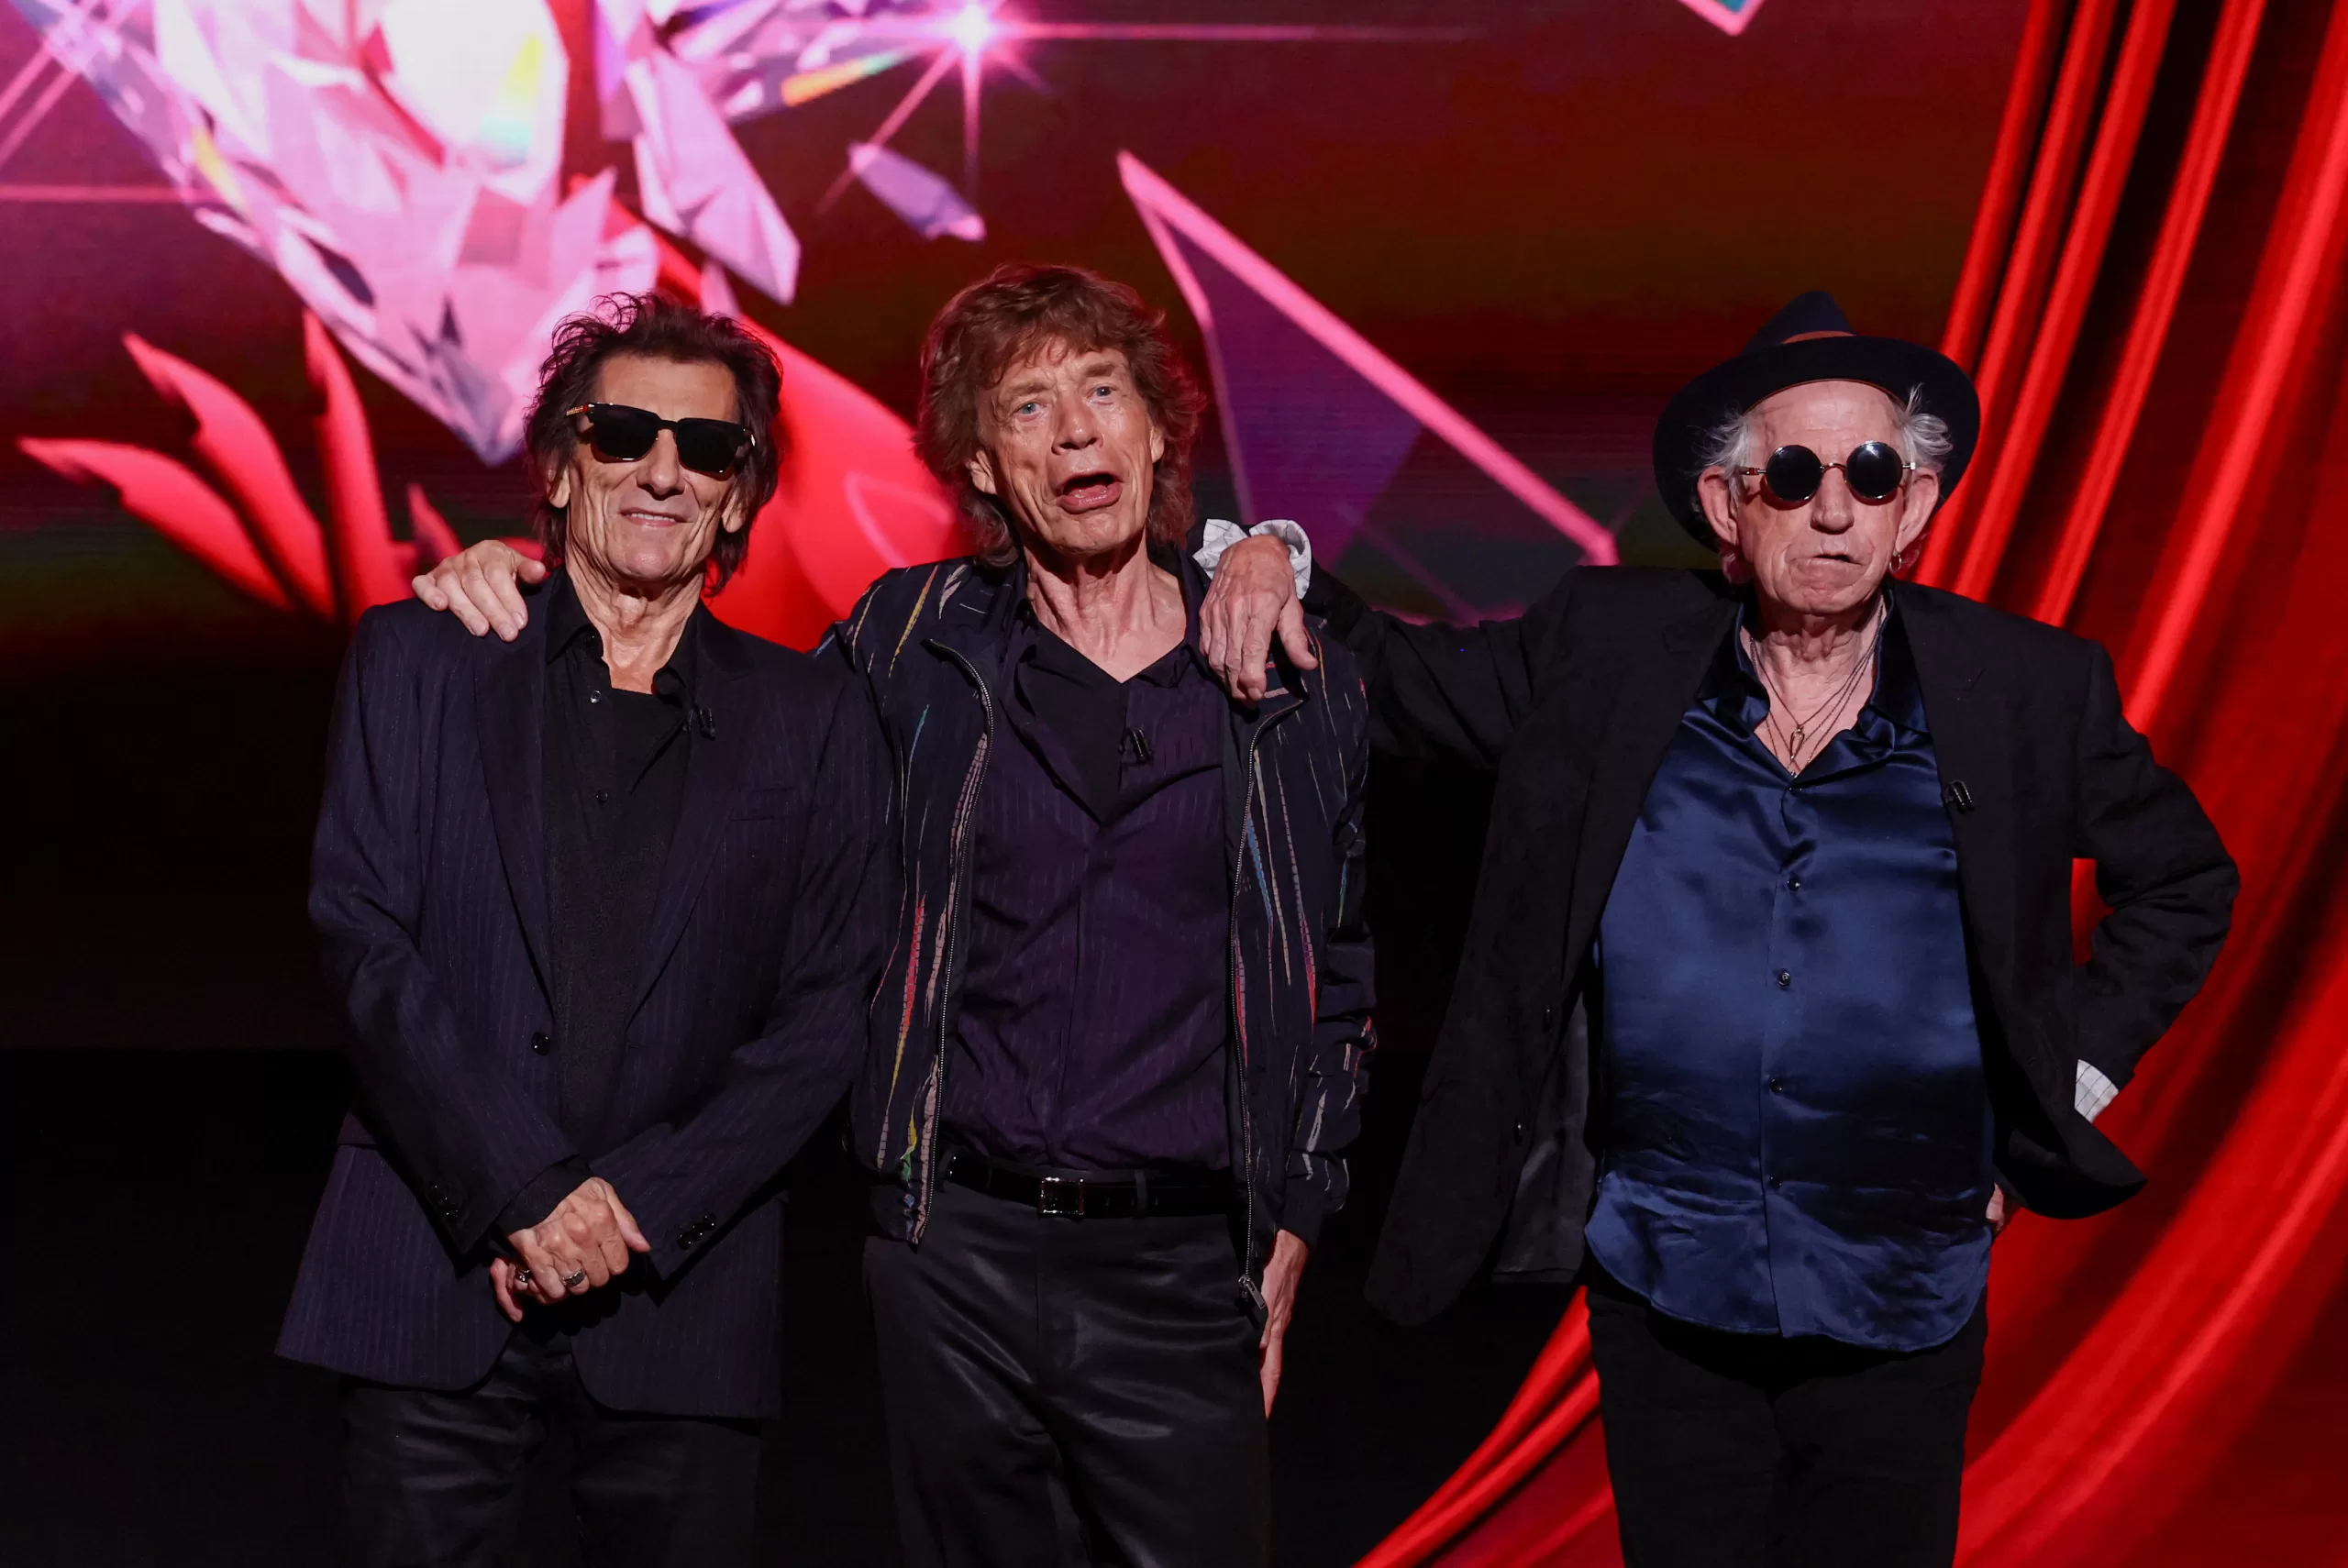 You are currently viewing ‘Angry’: lyrics, translation and what the new Rolling Stones song means